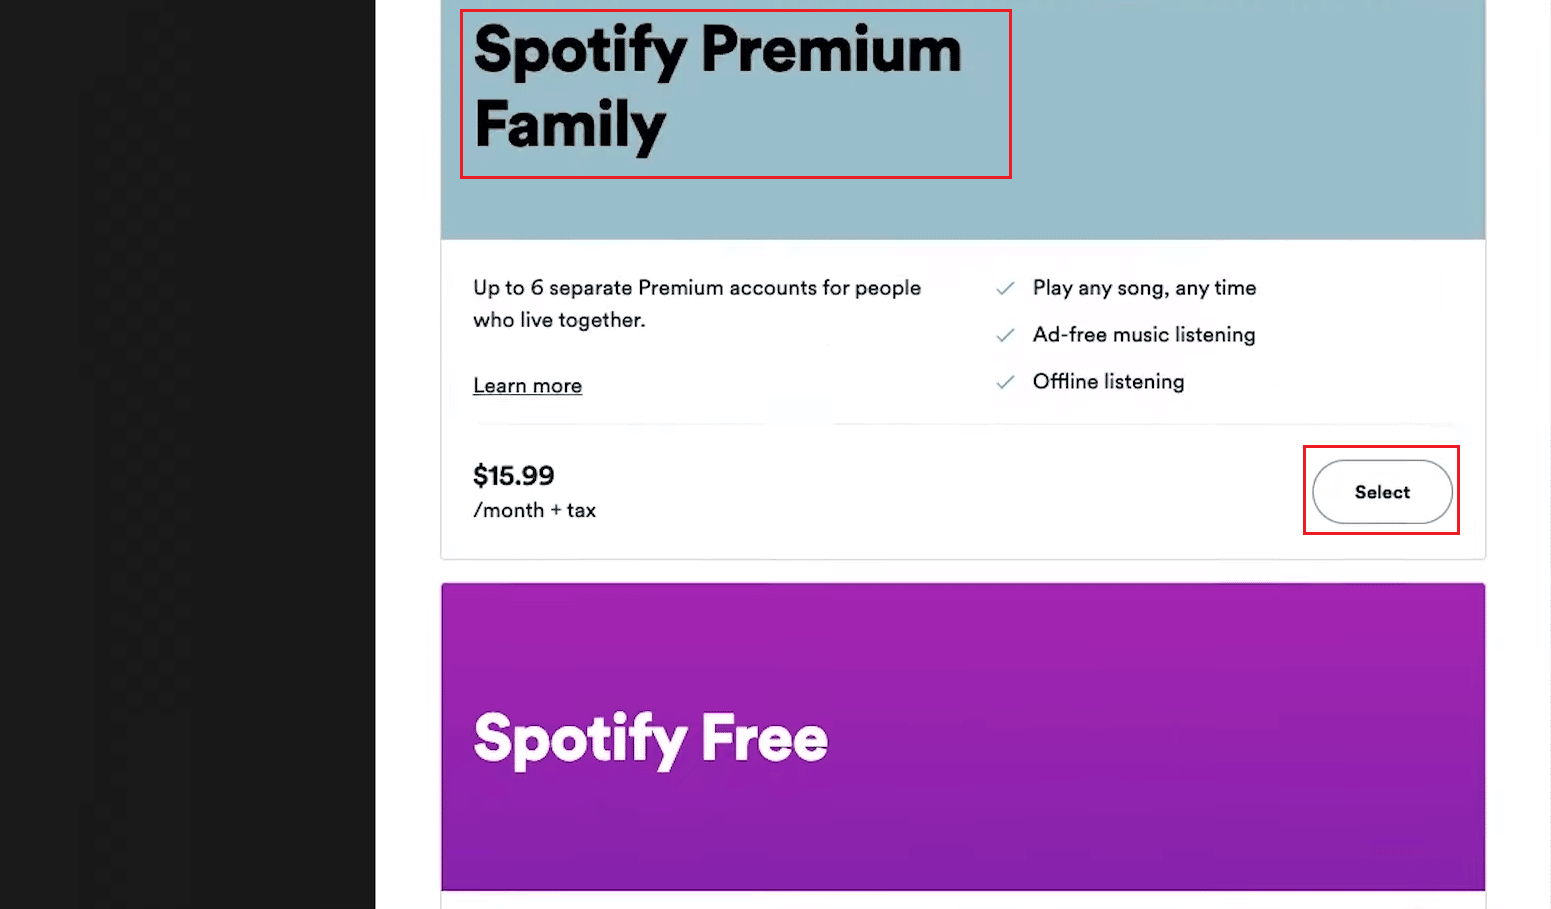 Scroll down and click on Select for the Spotify Premium Family plan